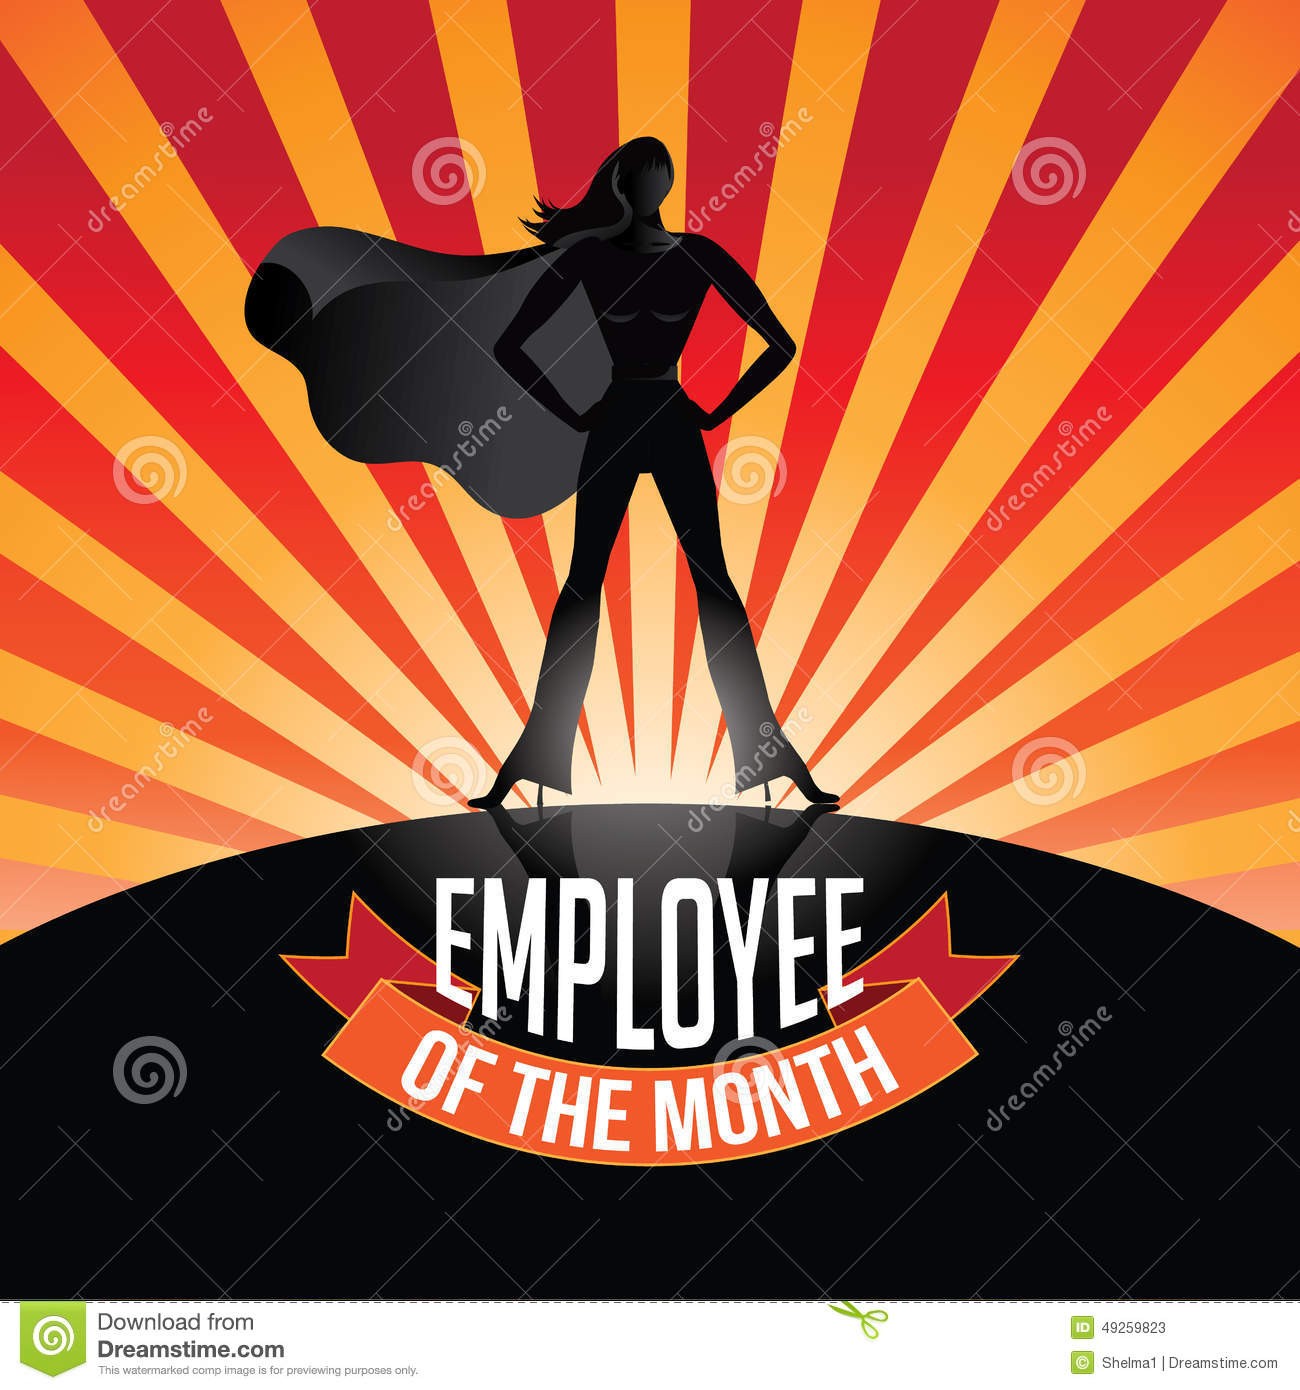 Employee Of The Month Burst Stock Vector Illustration Model Free Download